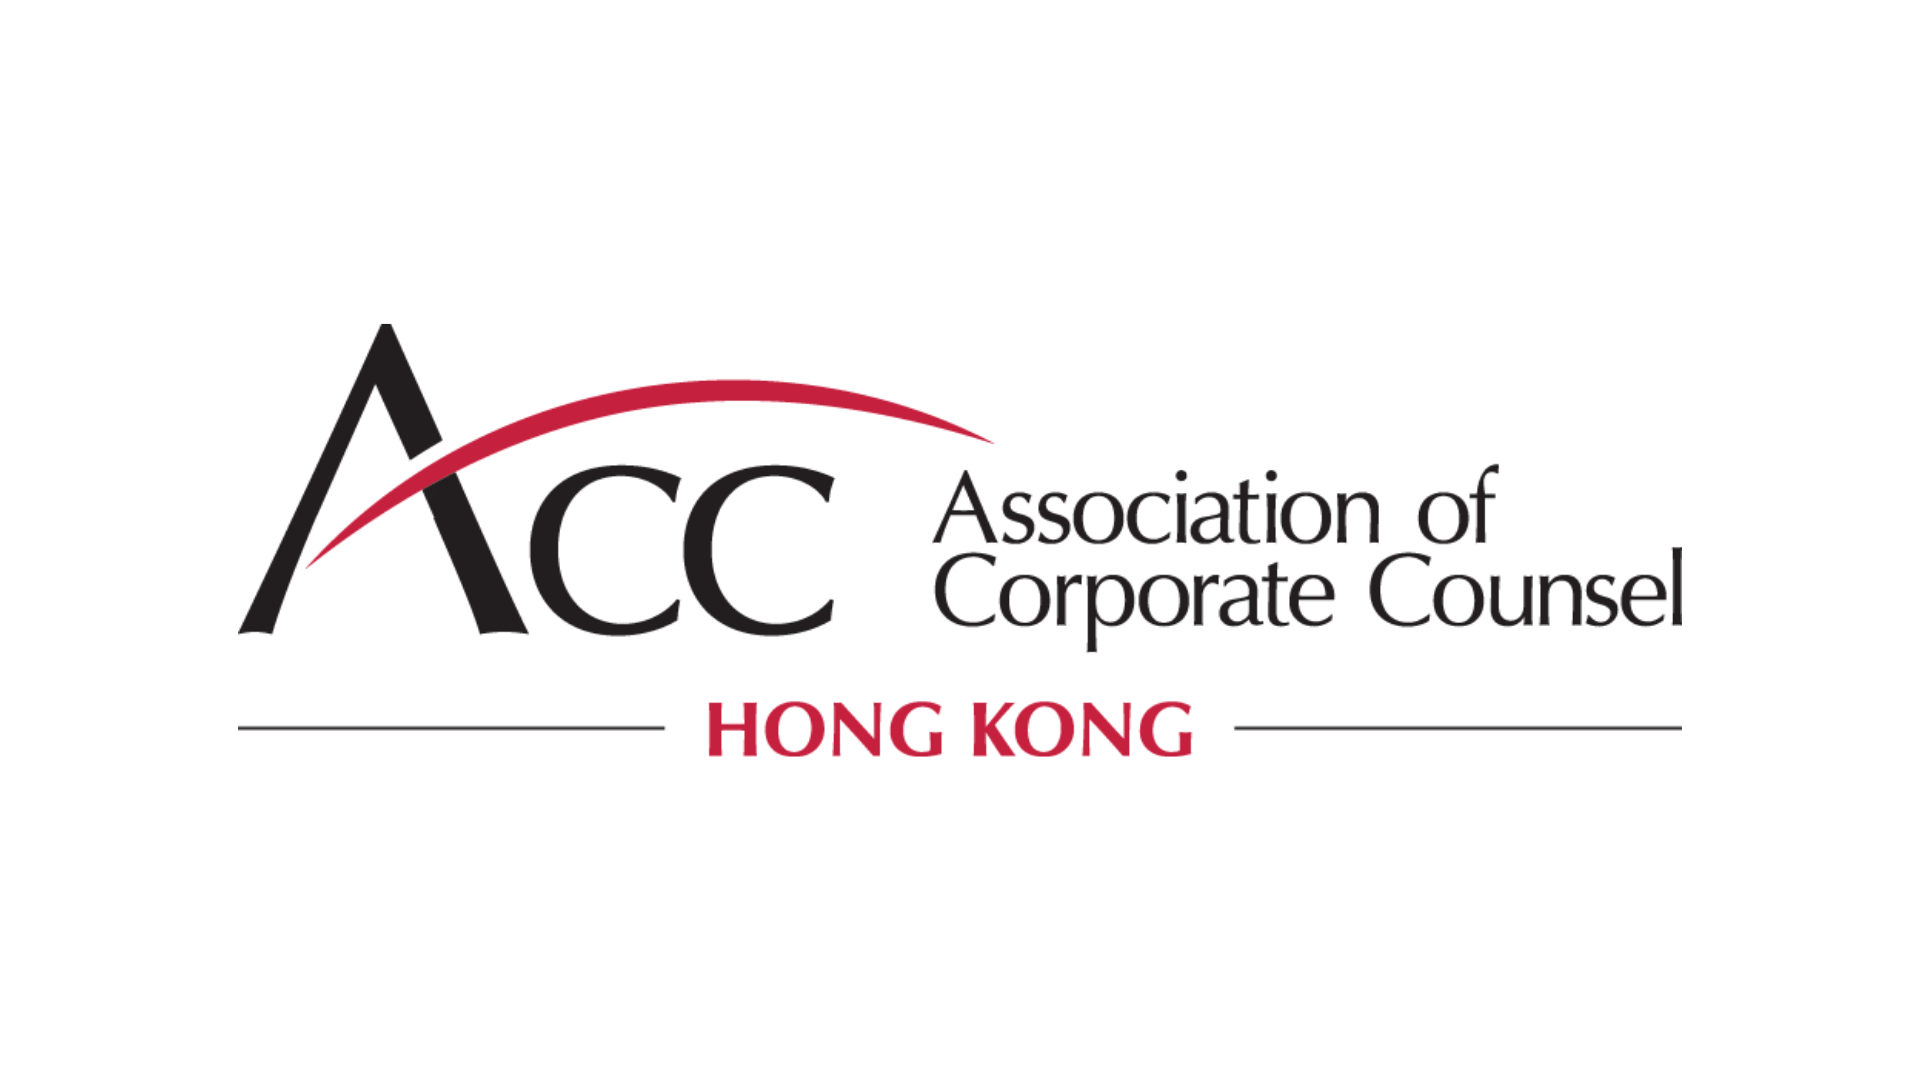 Association of Corporate Counsel (ACC) Hong Kong